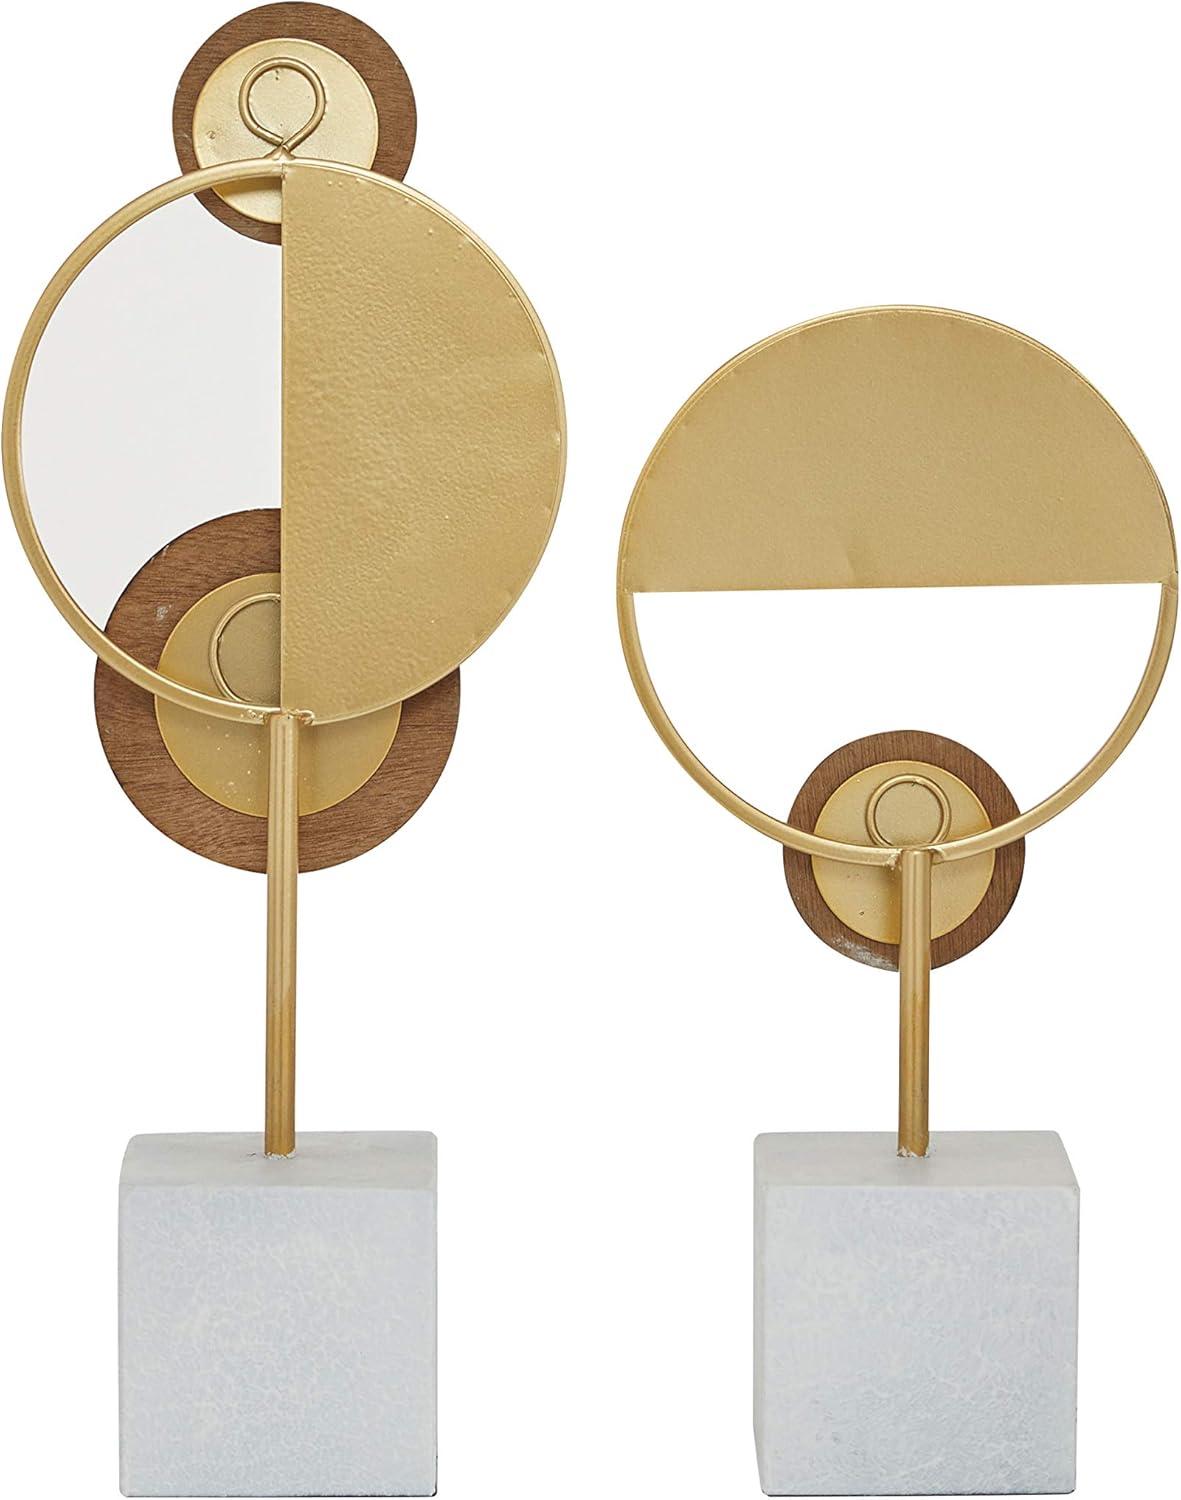 Gold Metal and Wood Geometric Sculpture Set, 19" and 15"H